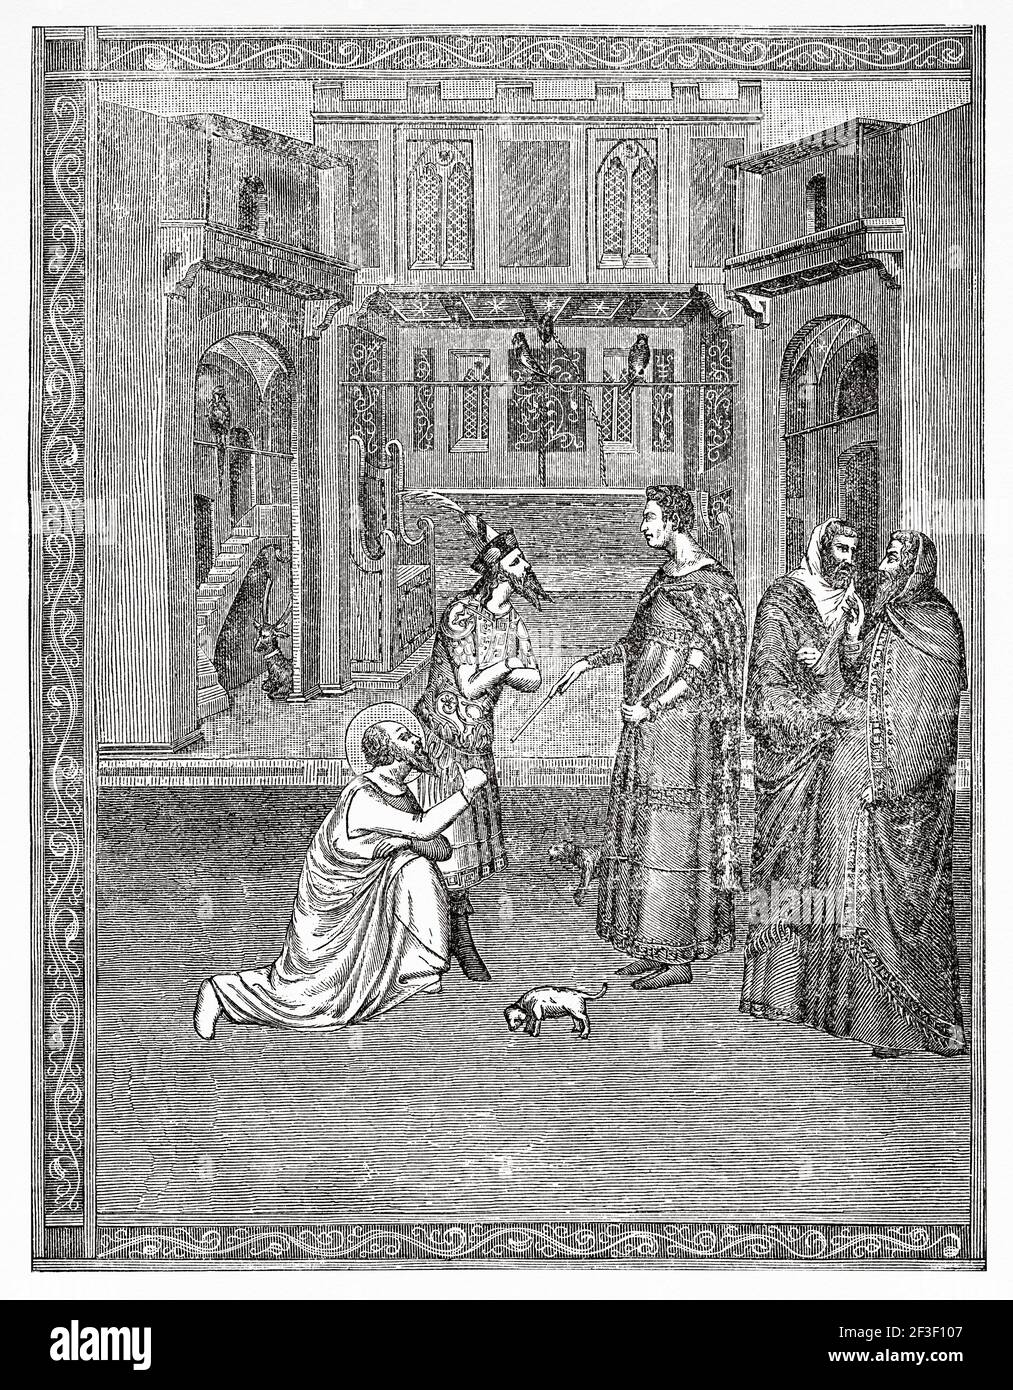 Joseph of Arimathea Before Pilate. Joseph of Arimathea and Nicodemus, disciples of the Lord, asking Pilate for permission to collect the body of Jesus. Old 19th century engraved illustration from Jesus Christ by Veuillot 1890 Stock Photo